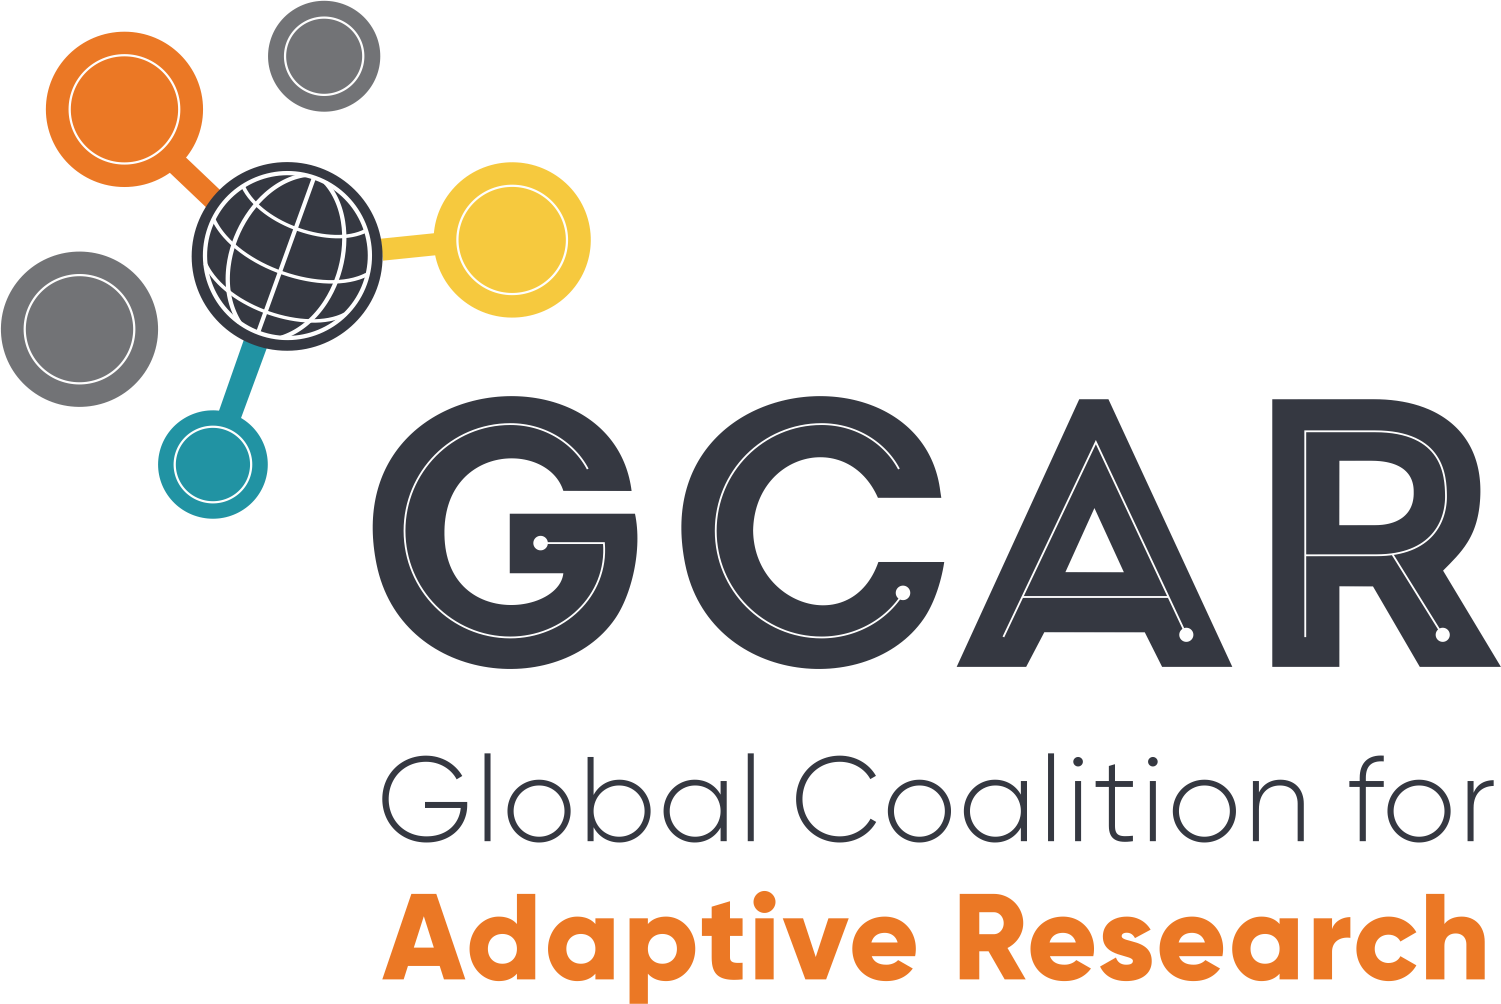 Global Coalition for Adaptive Research logo